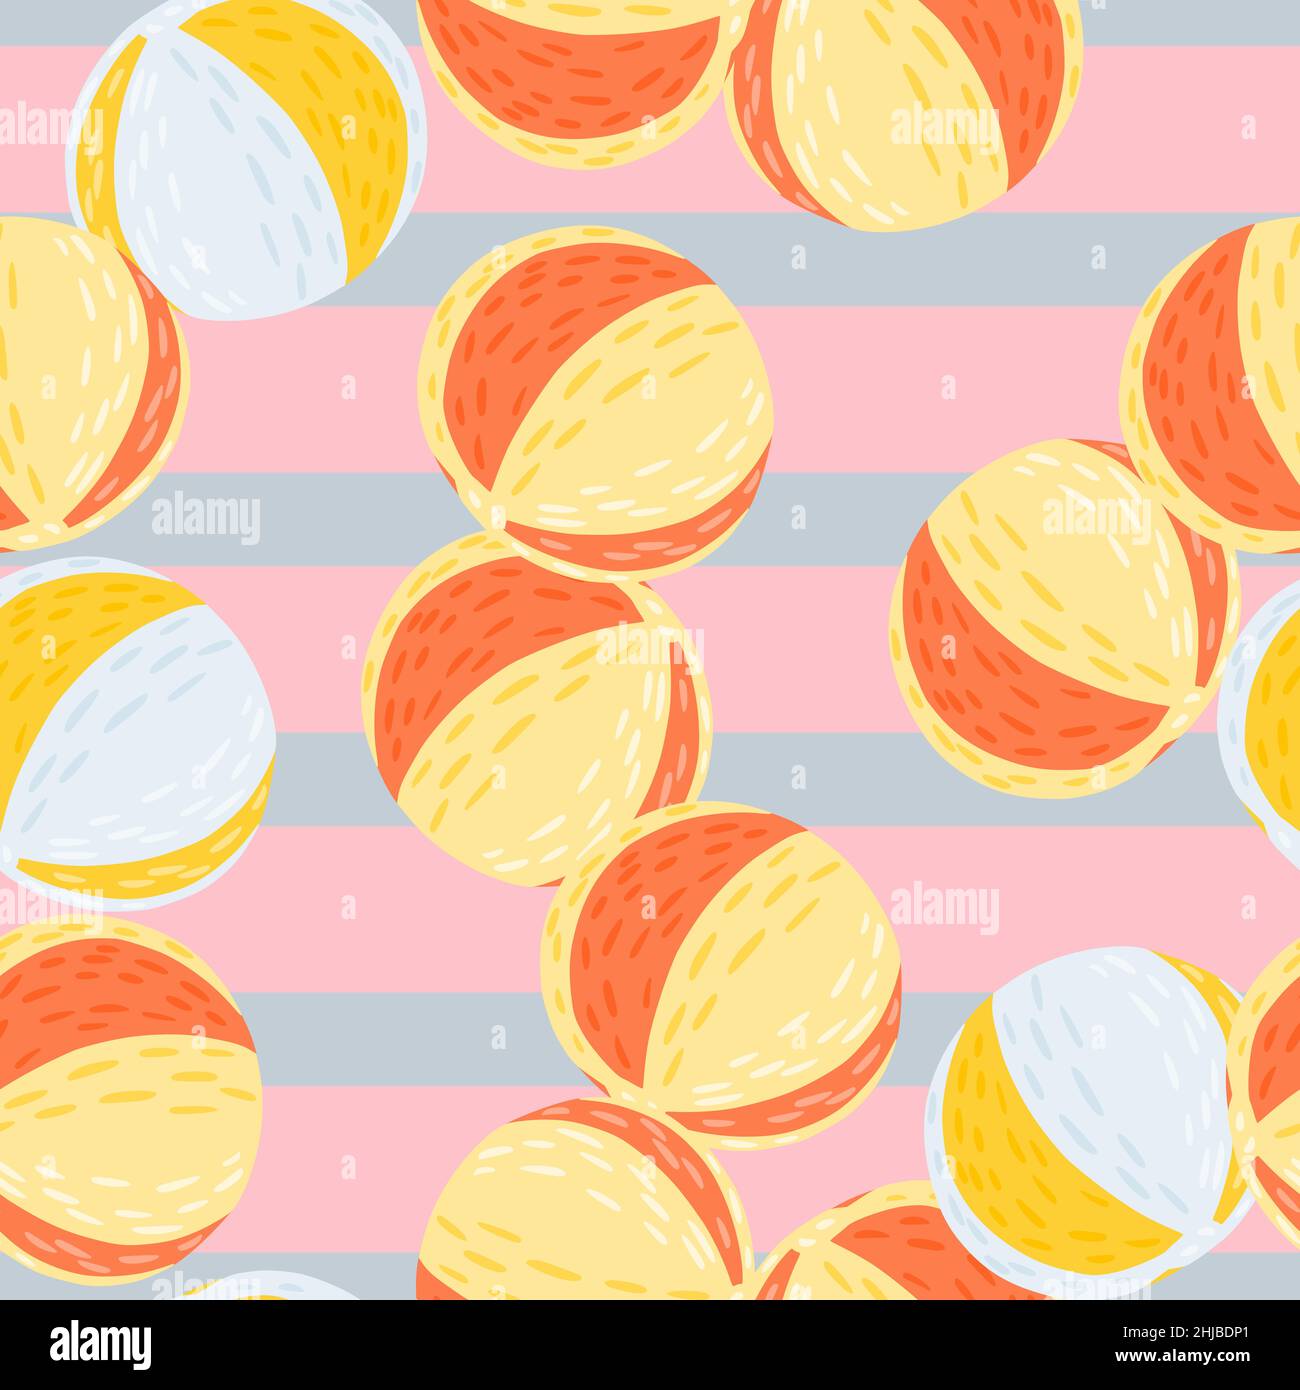 Scrapbook summer seamless pattern with random orange beach ball shapes striped pink and blue background flat vector print for textile fabric giftw stock vector image art